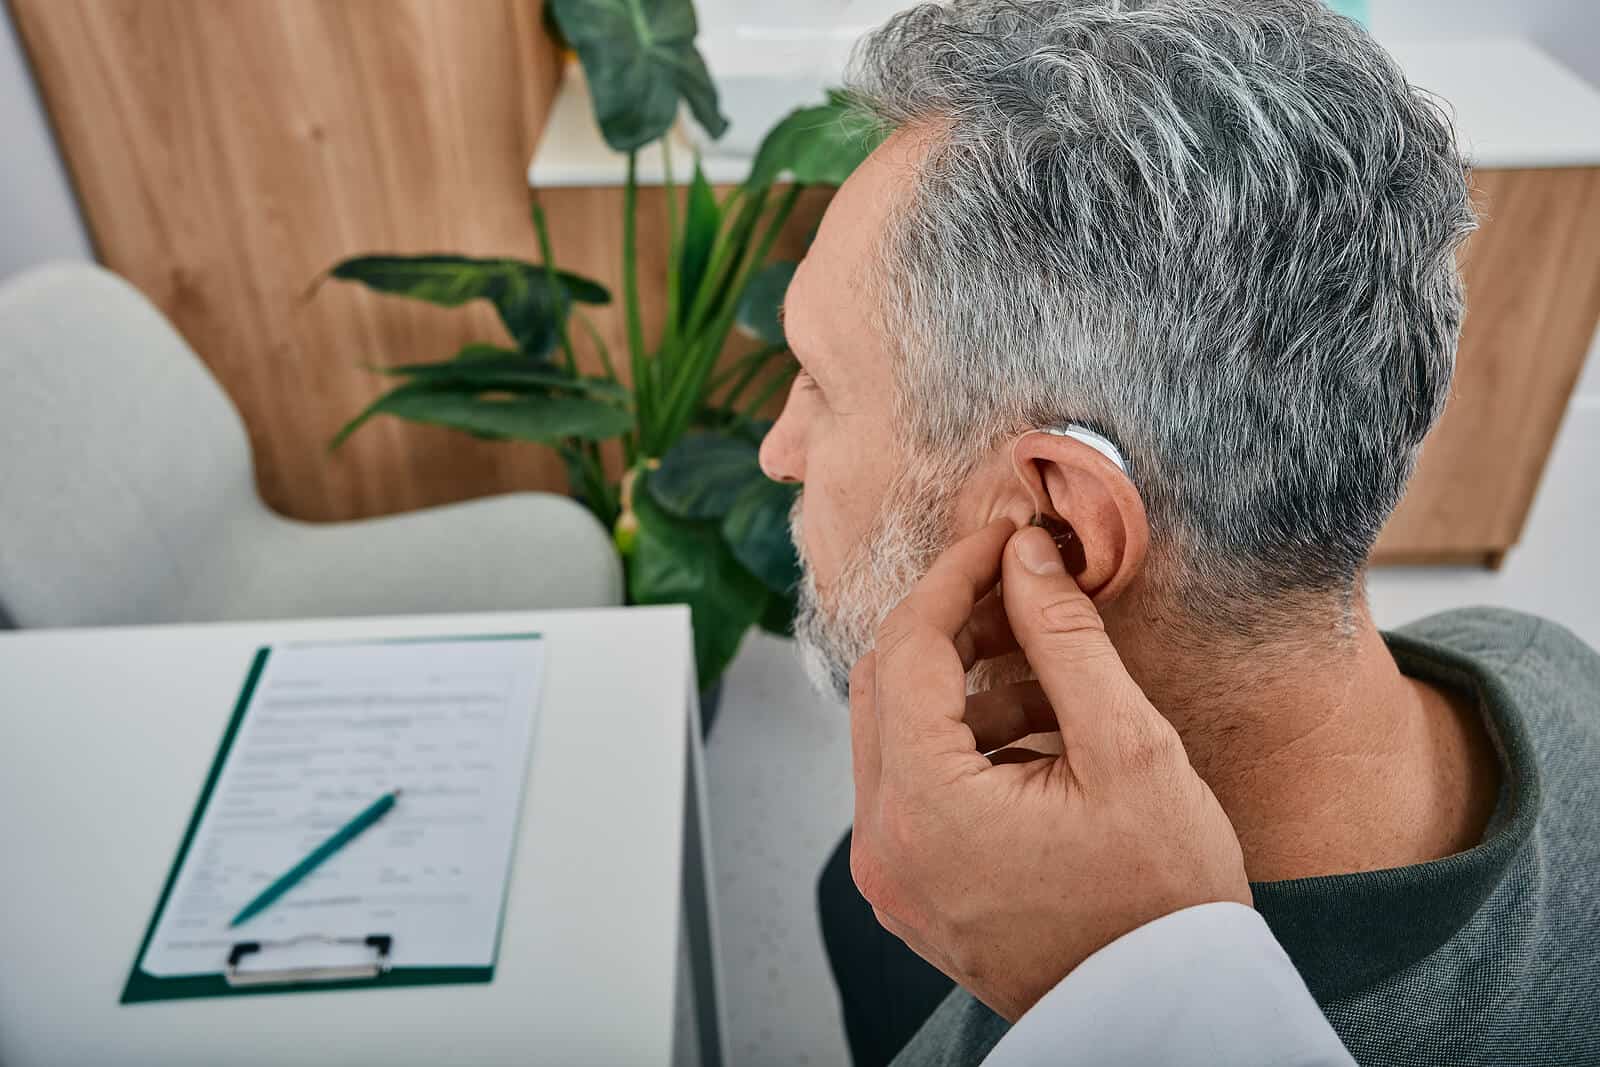 hearing evaluation